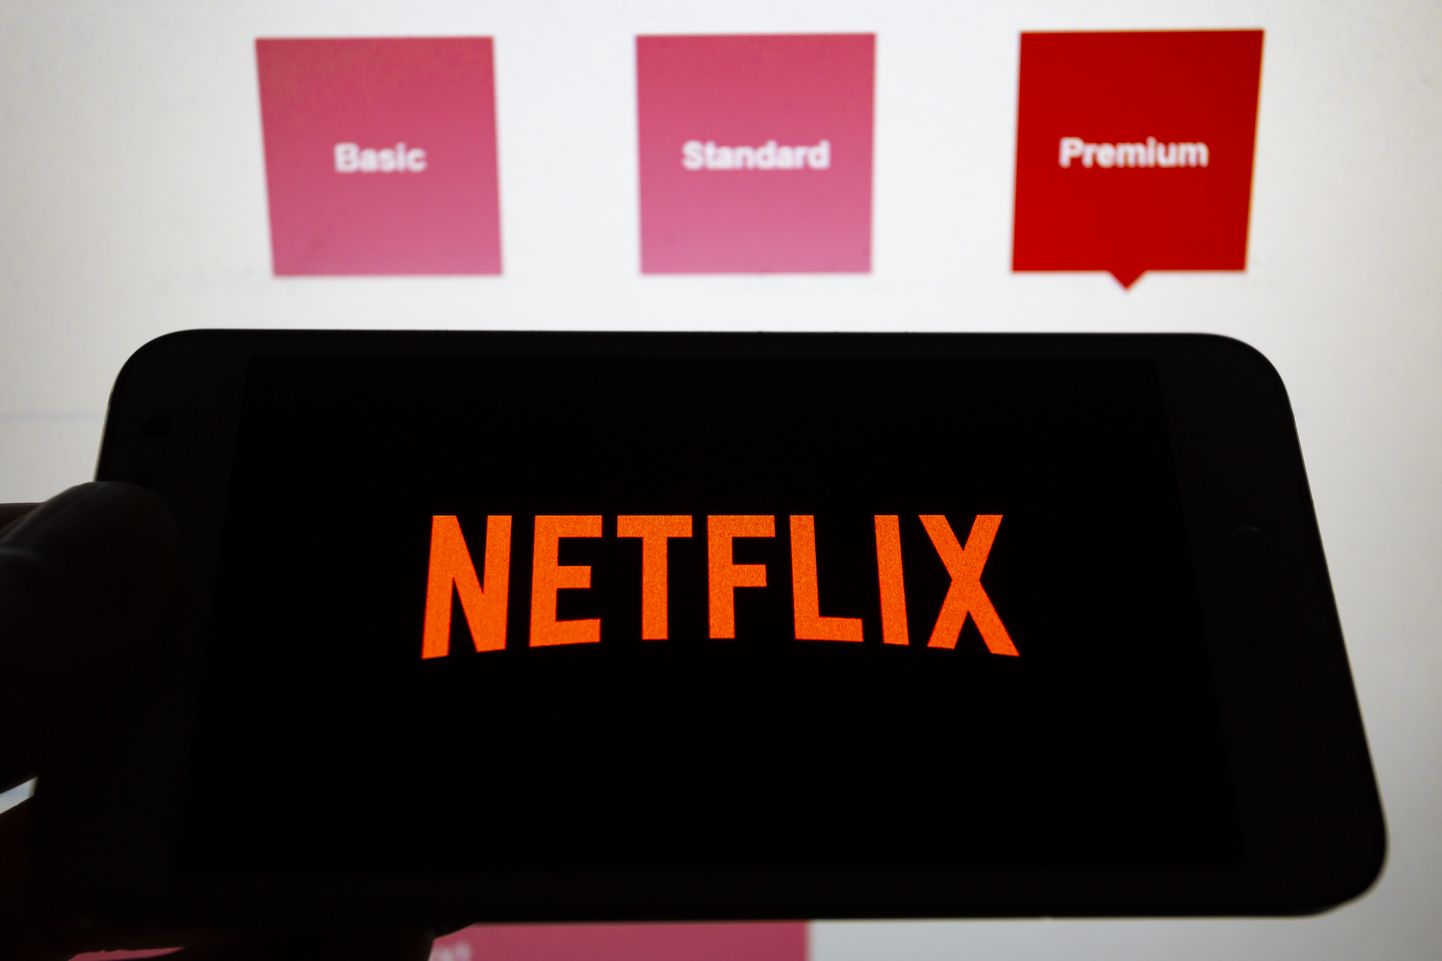 January 14, 2022, Asuncion, Paraguay: Illustration: Logo of Netflix, a streaming media company, is displayed on a smartphone. Netflix is raising the prices of its subscription services in the United States and Canada. (Credit Image: © Andre M. Chang/ZUMA Press Wire)